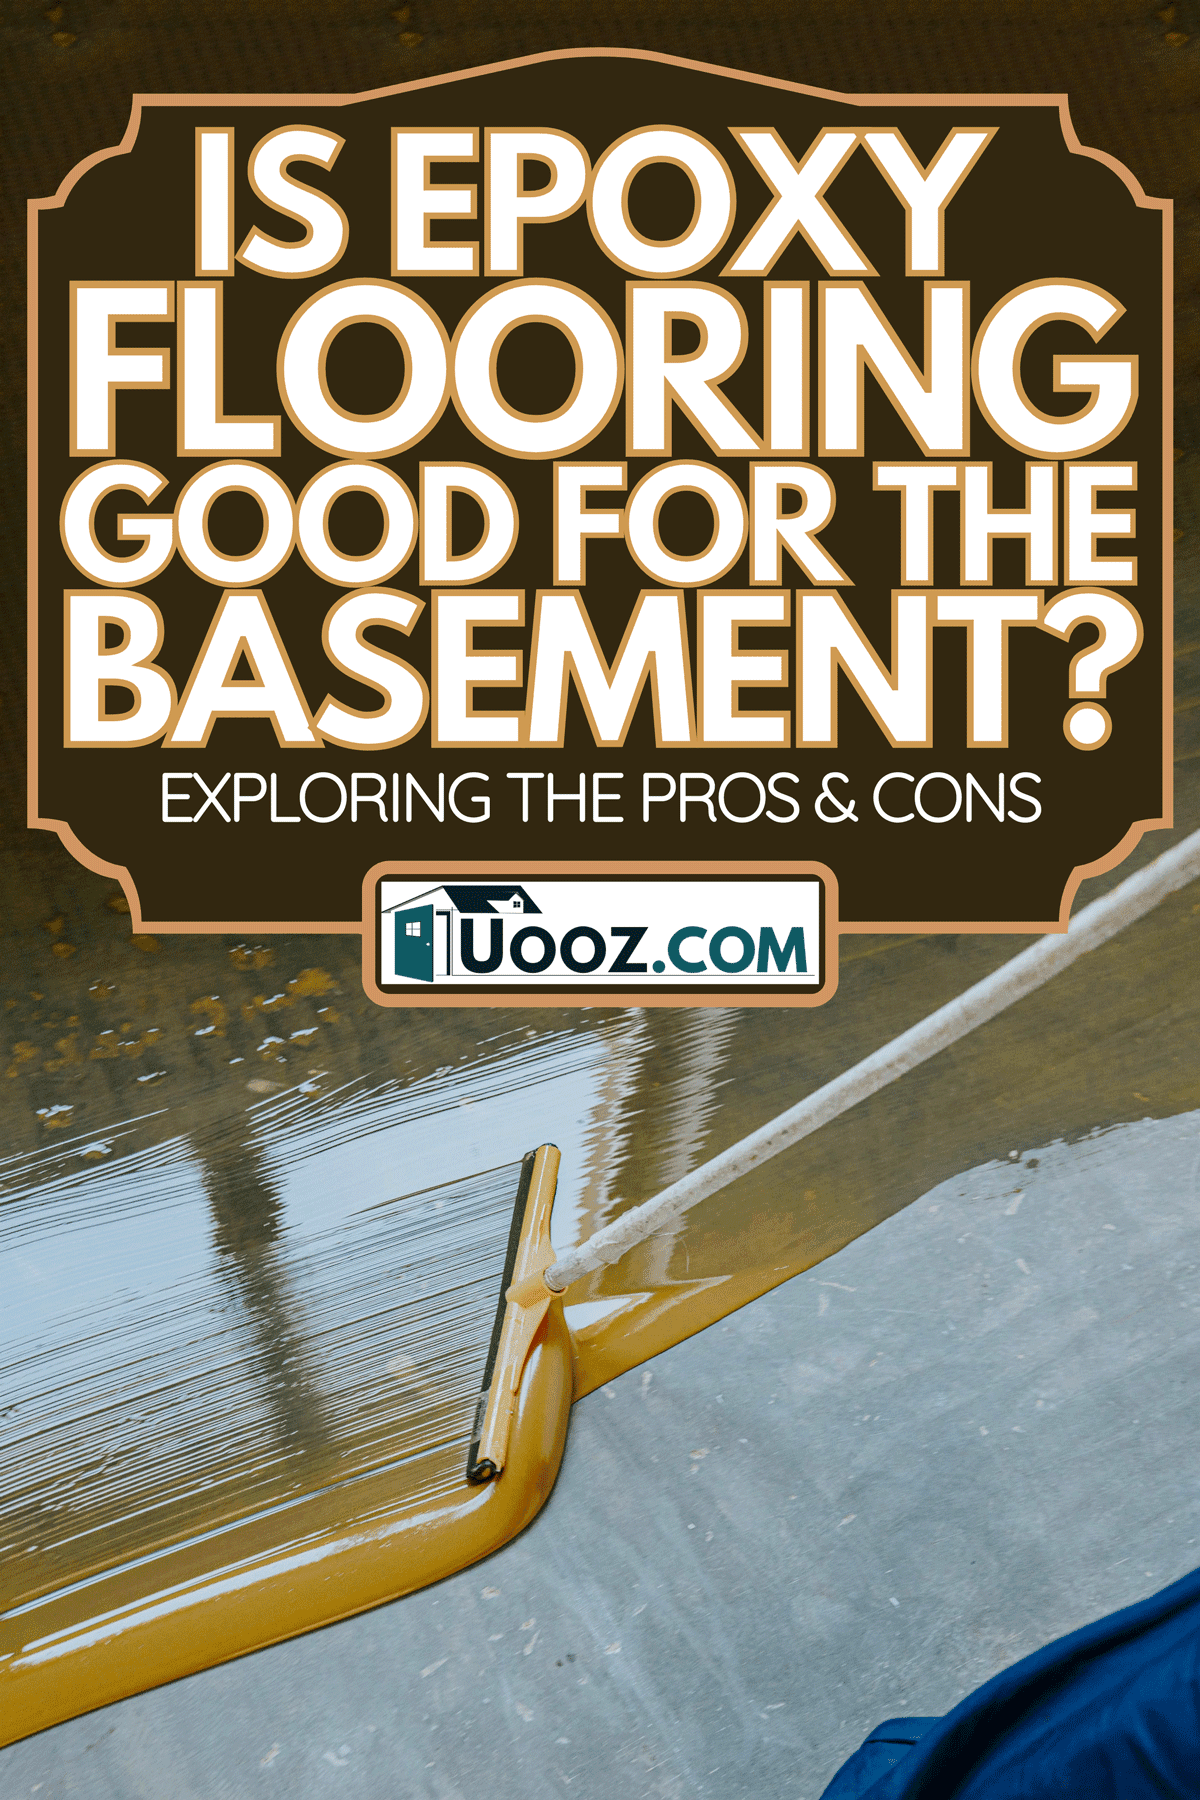 Epoxy resin applied to the floor, Is Epoxy Flooring Good For The Basement? [Exploring the Pros & Cons]